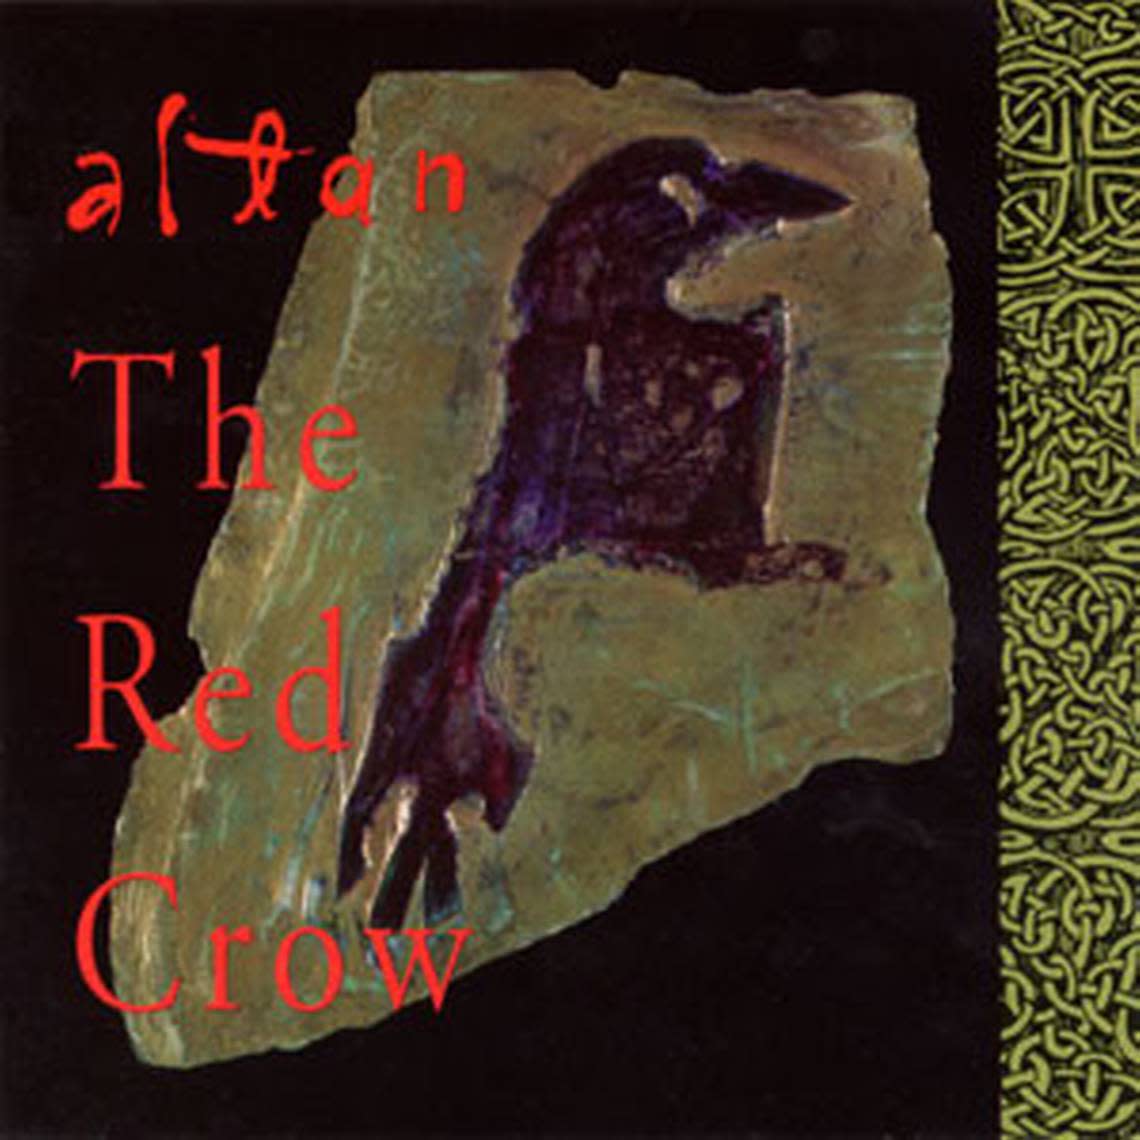 Altan, “The Red Crow”